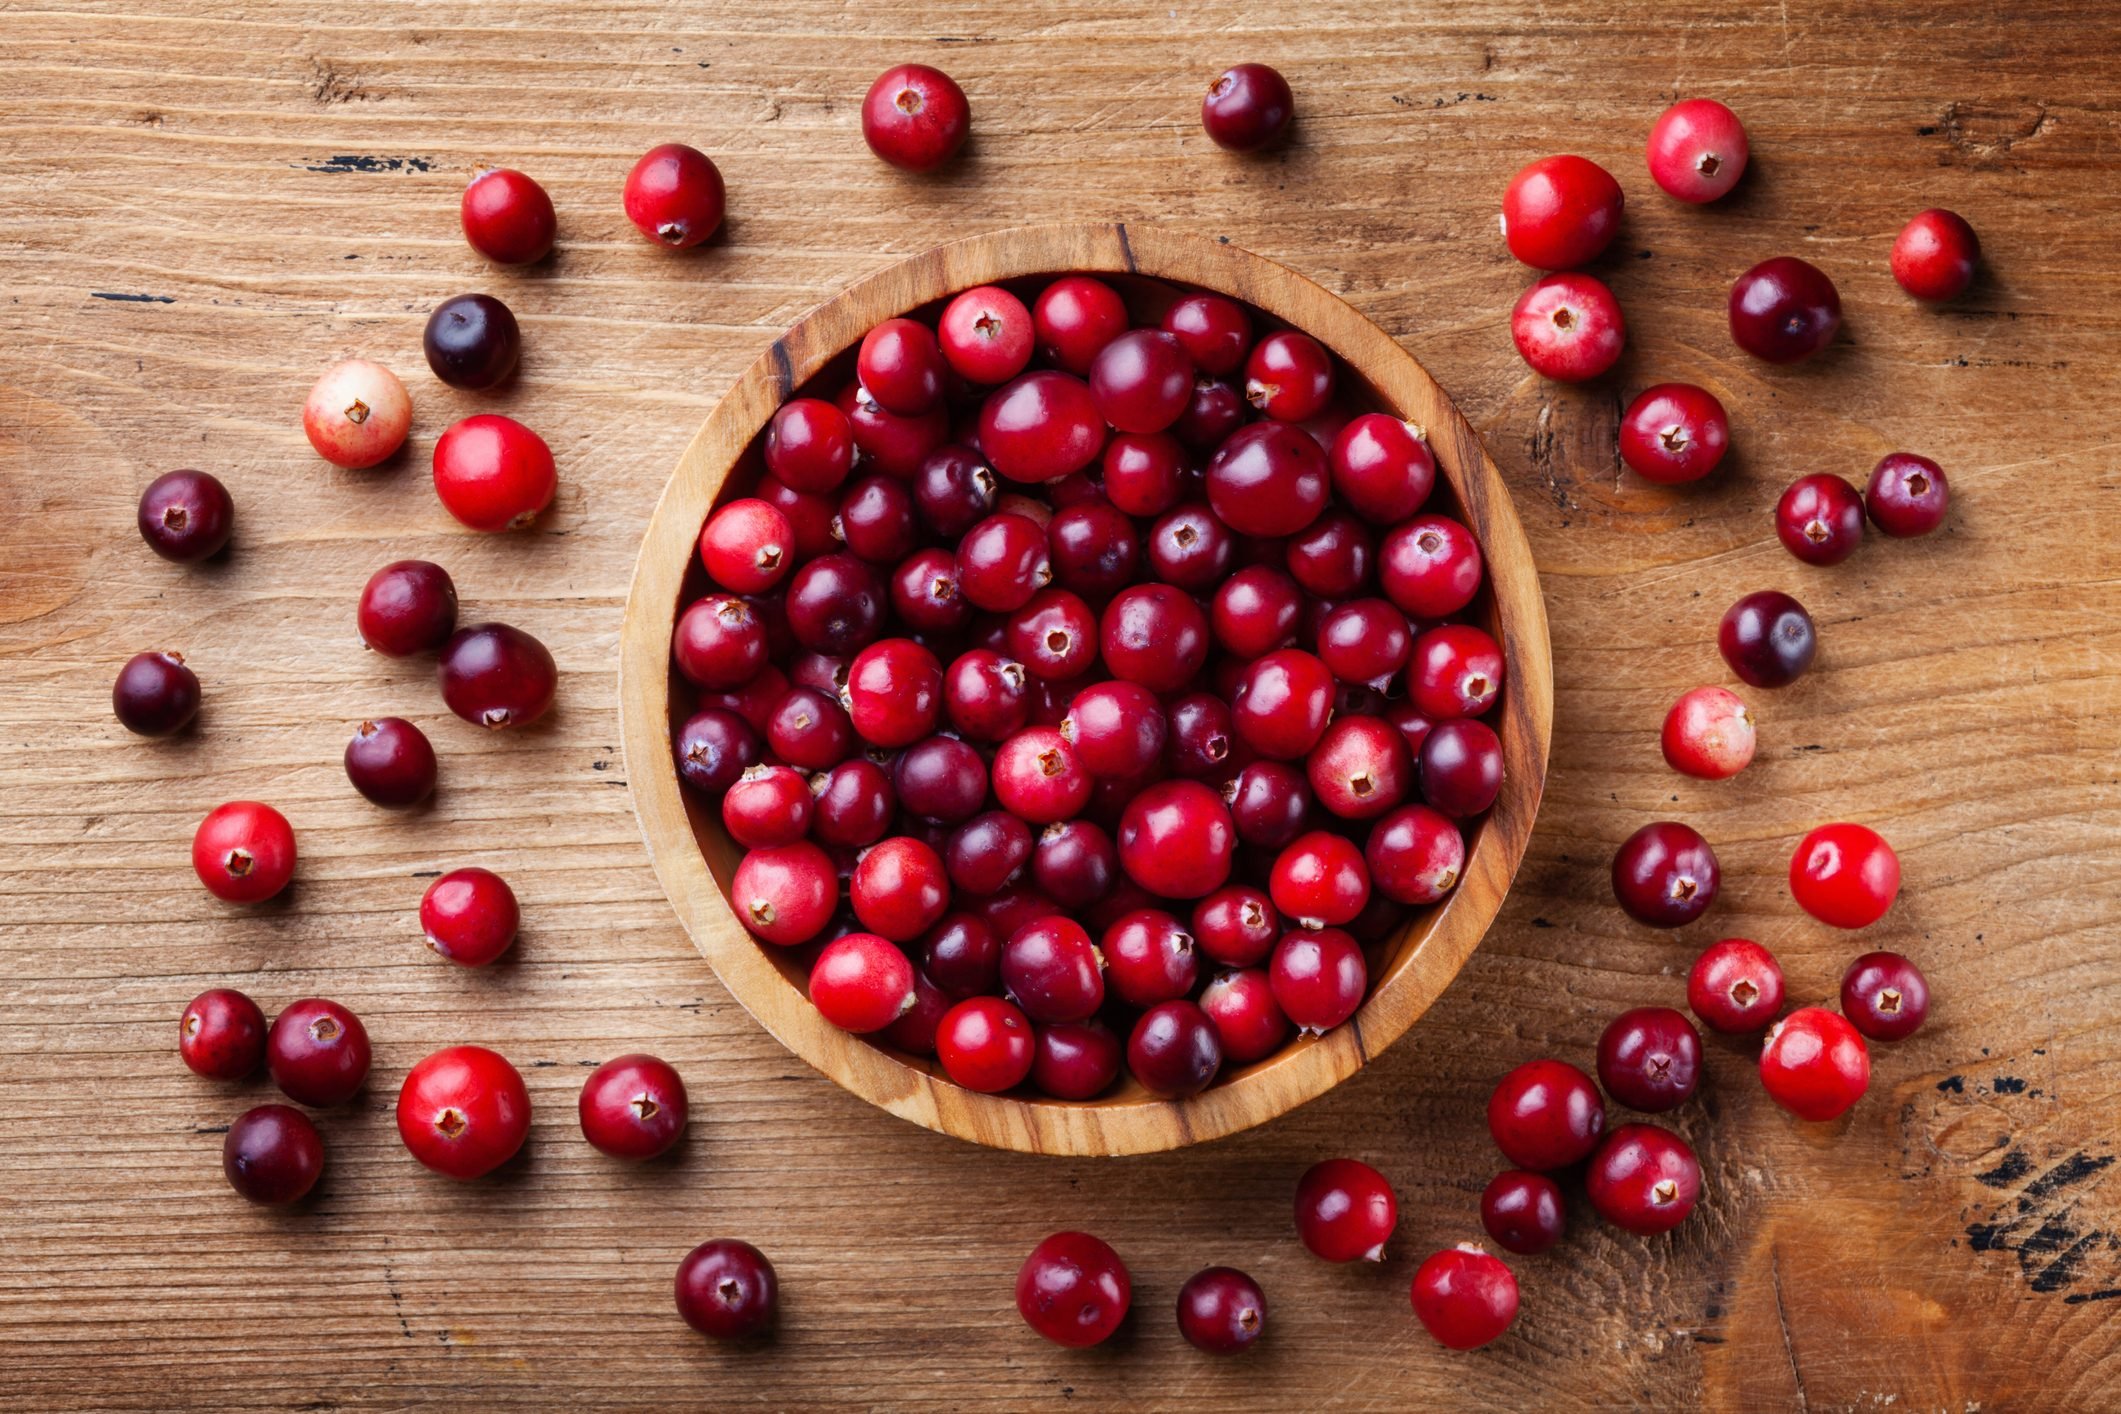 Should You Eat Cranberries? The Benefits, Nutrition, and More